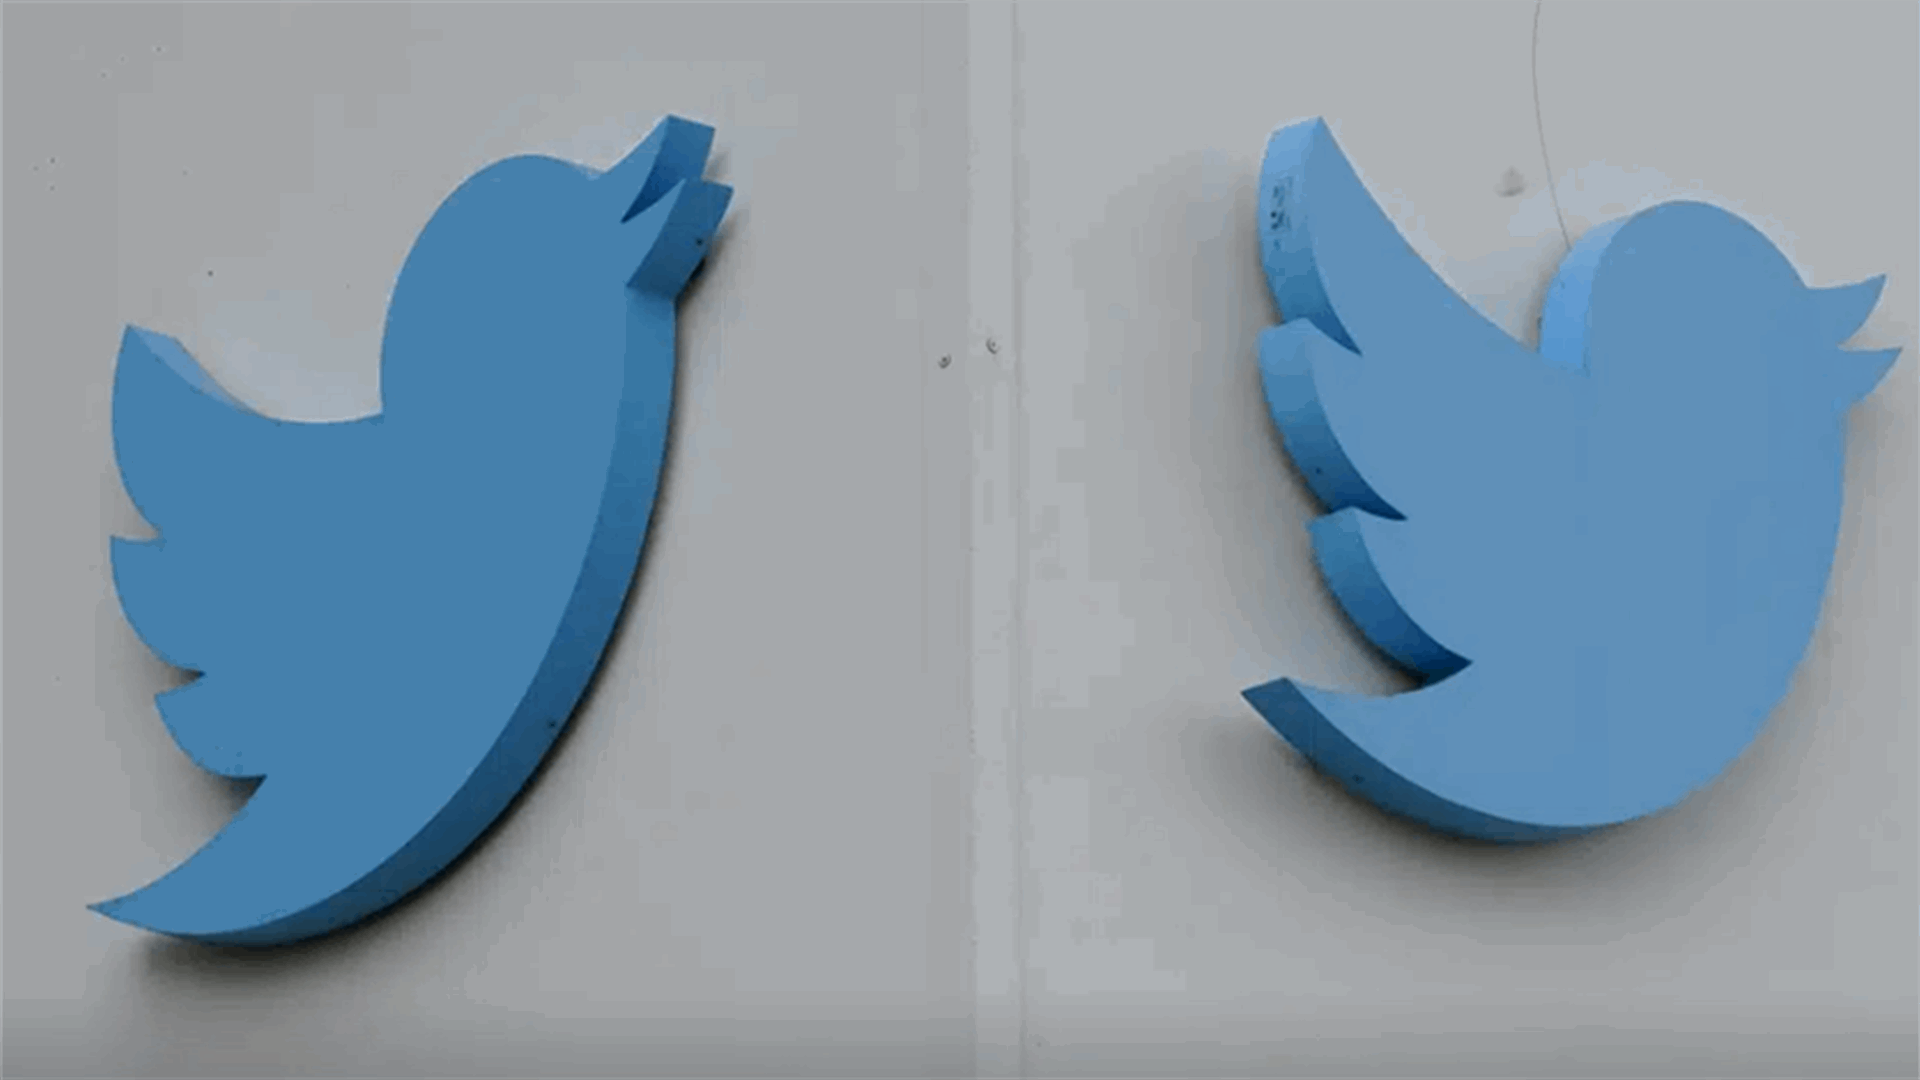 Twitter says it will relax ban on political advertising